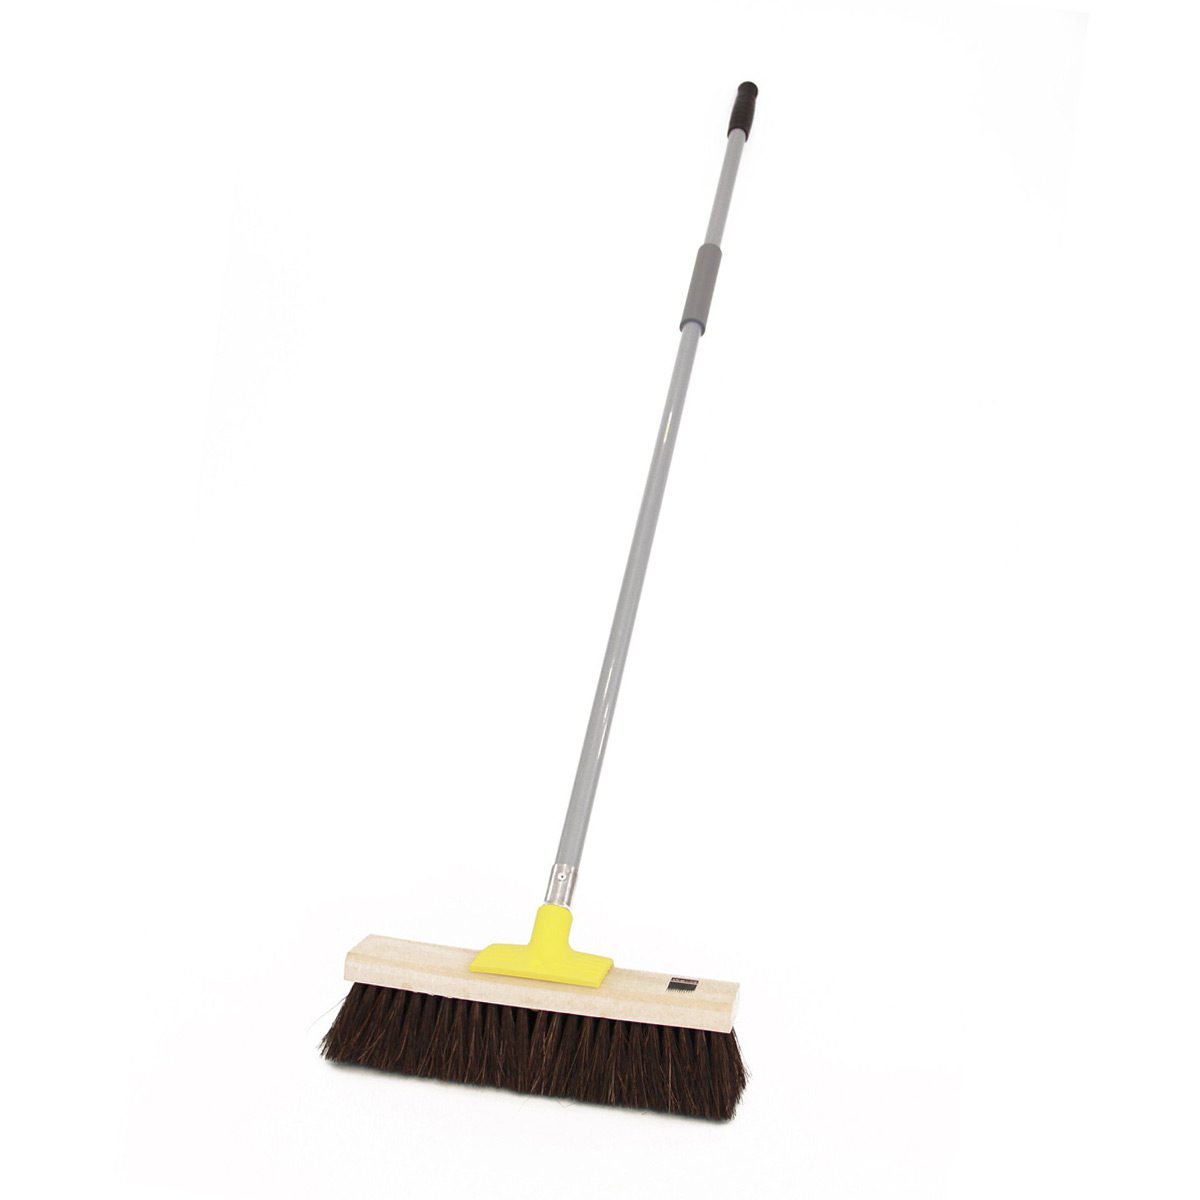 cleaning-equipment-brushware-platform-broom-complete-with-handle-wooden-stock-natural-java-fill-available-455mm-610mm-vjs-distributors-RBAN092CSKU